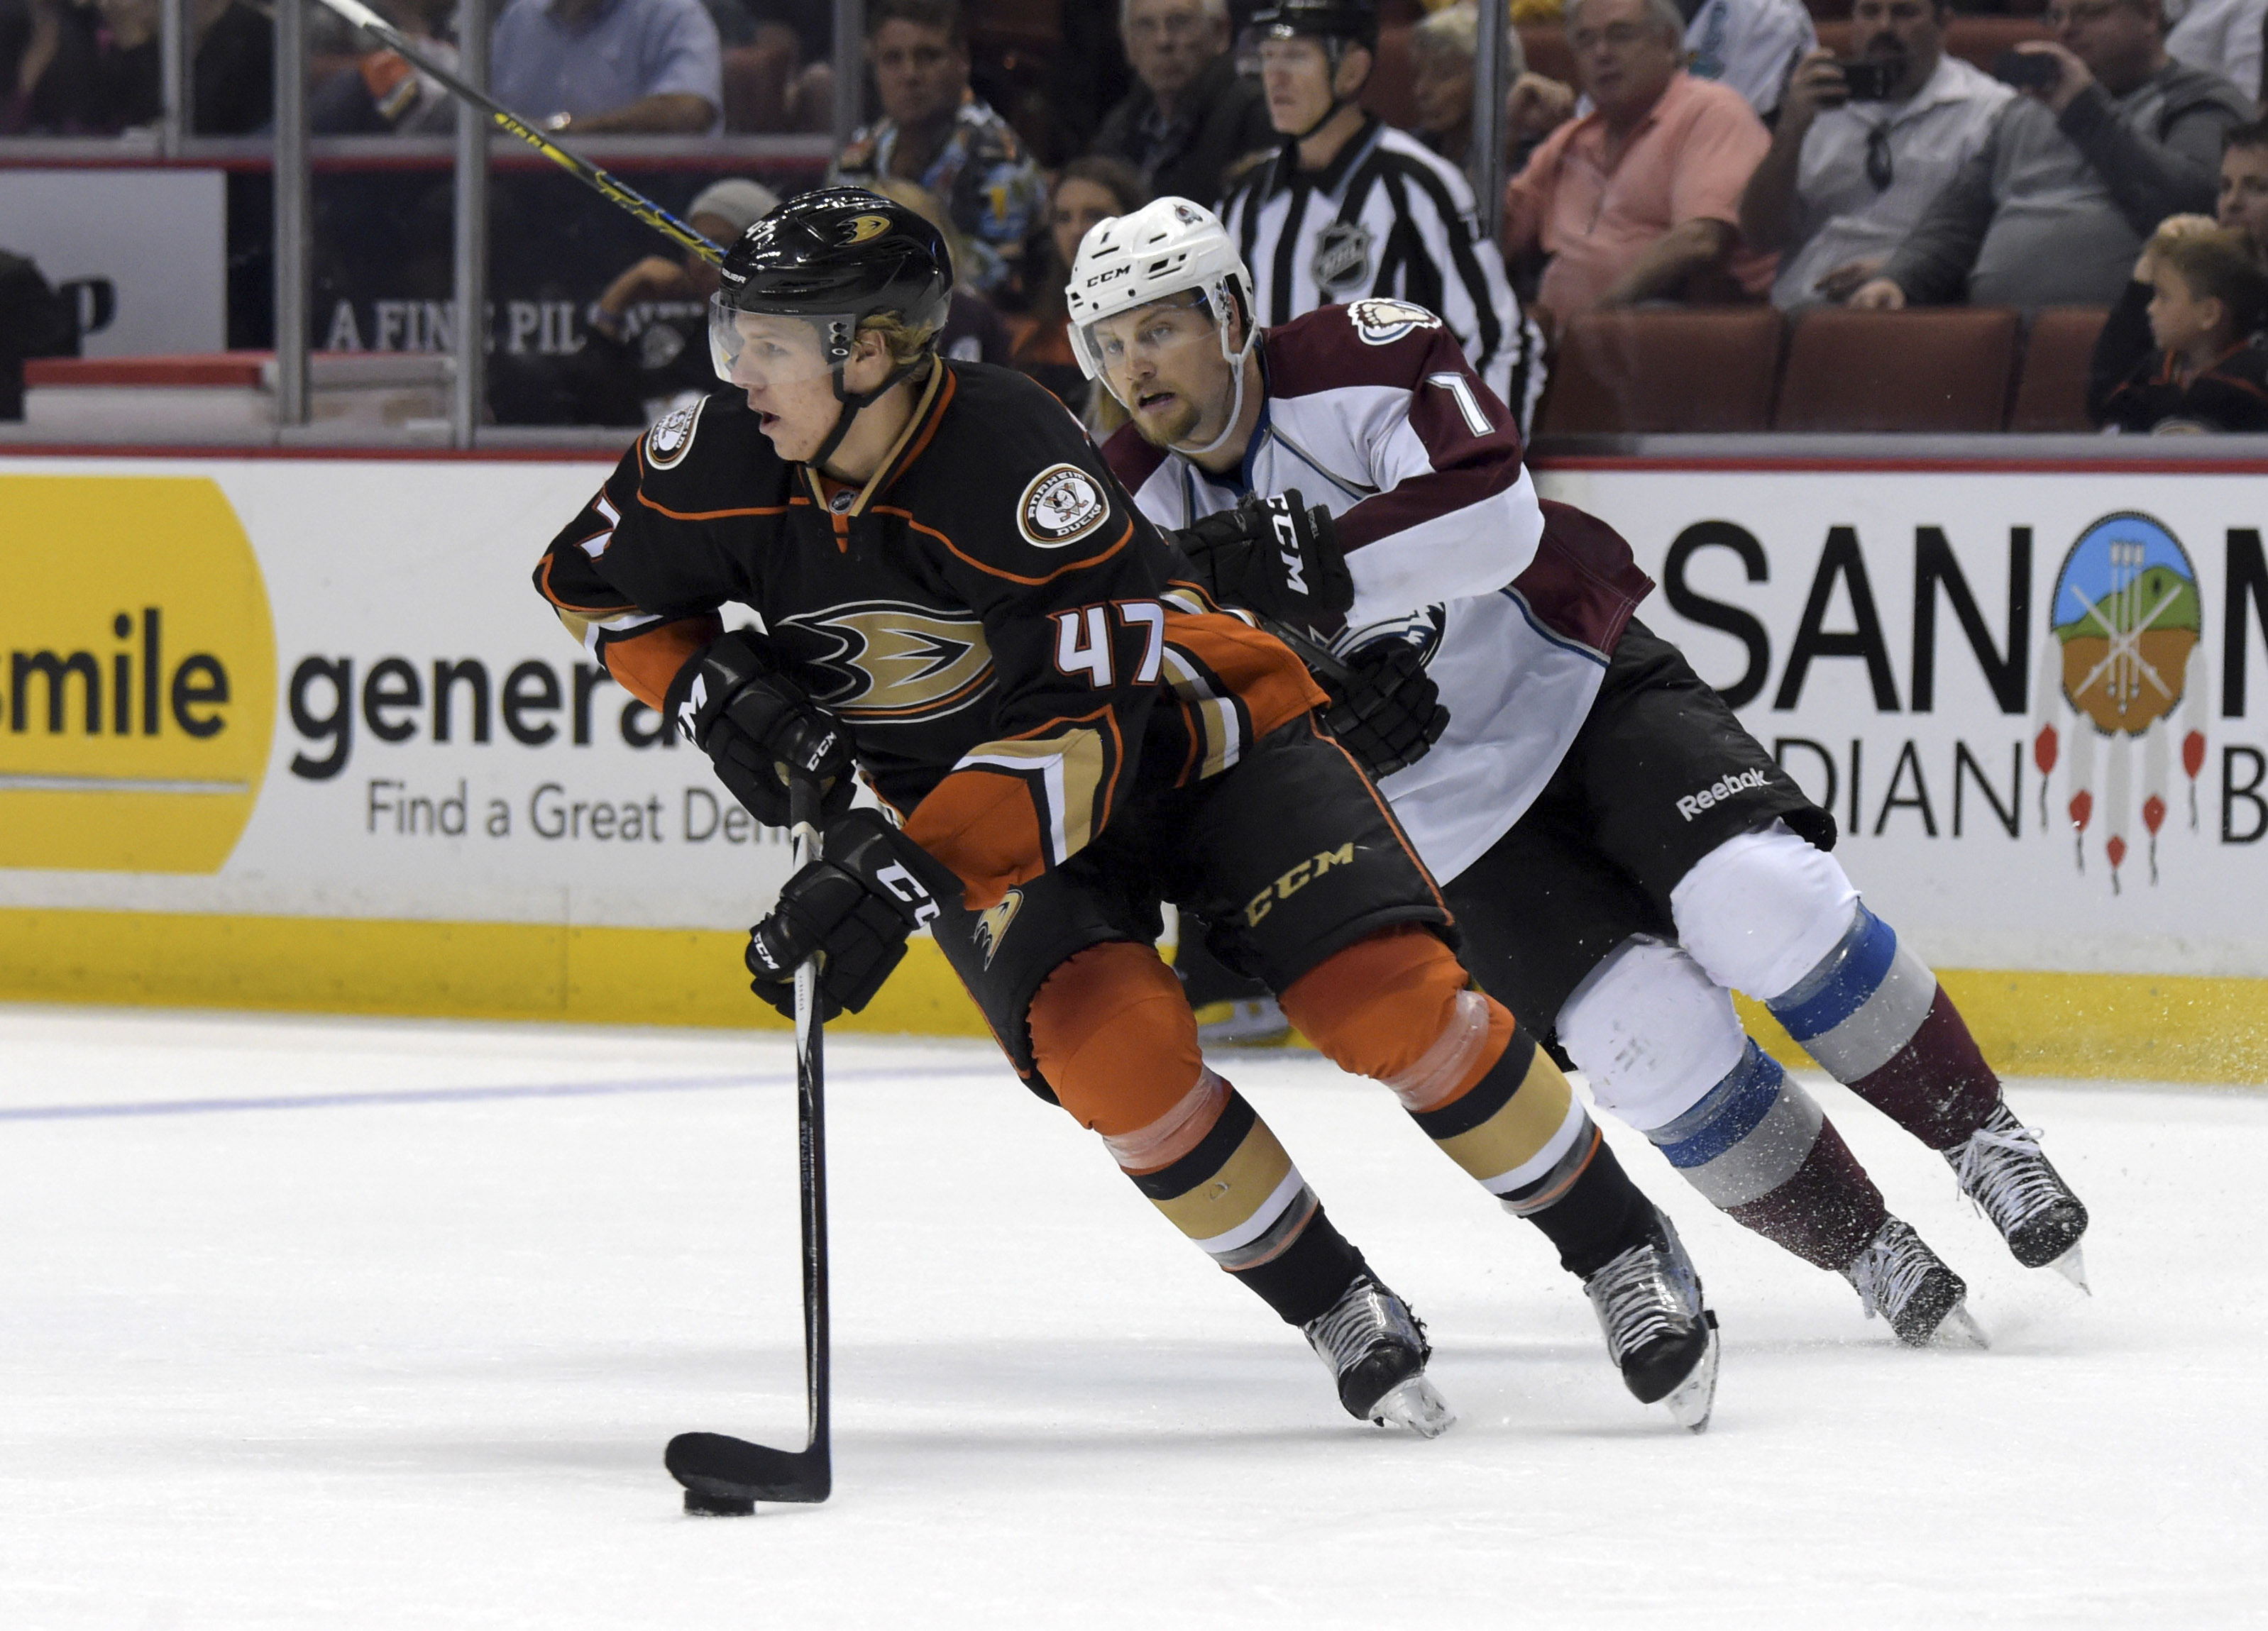 Hampus Lindholm, who had a pair of assists tonight, skates against the Avalanche last season.